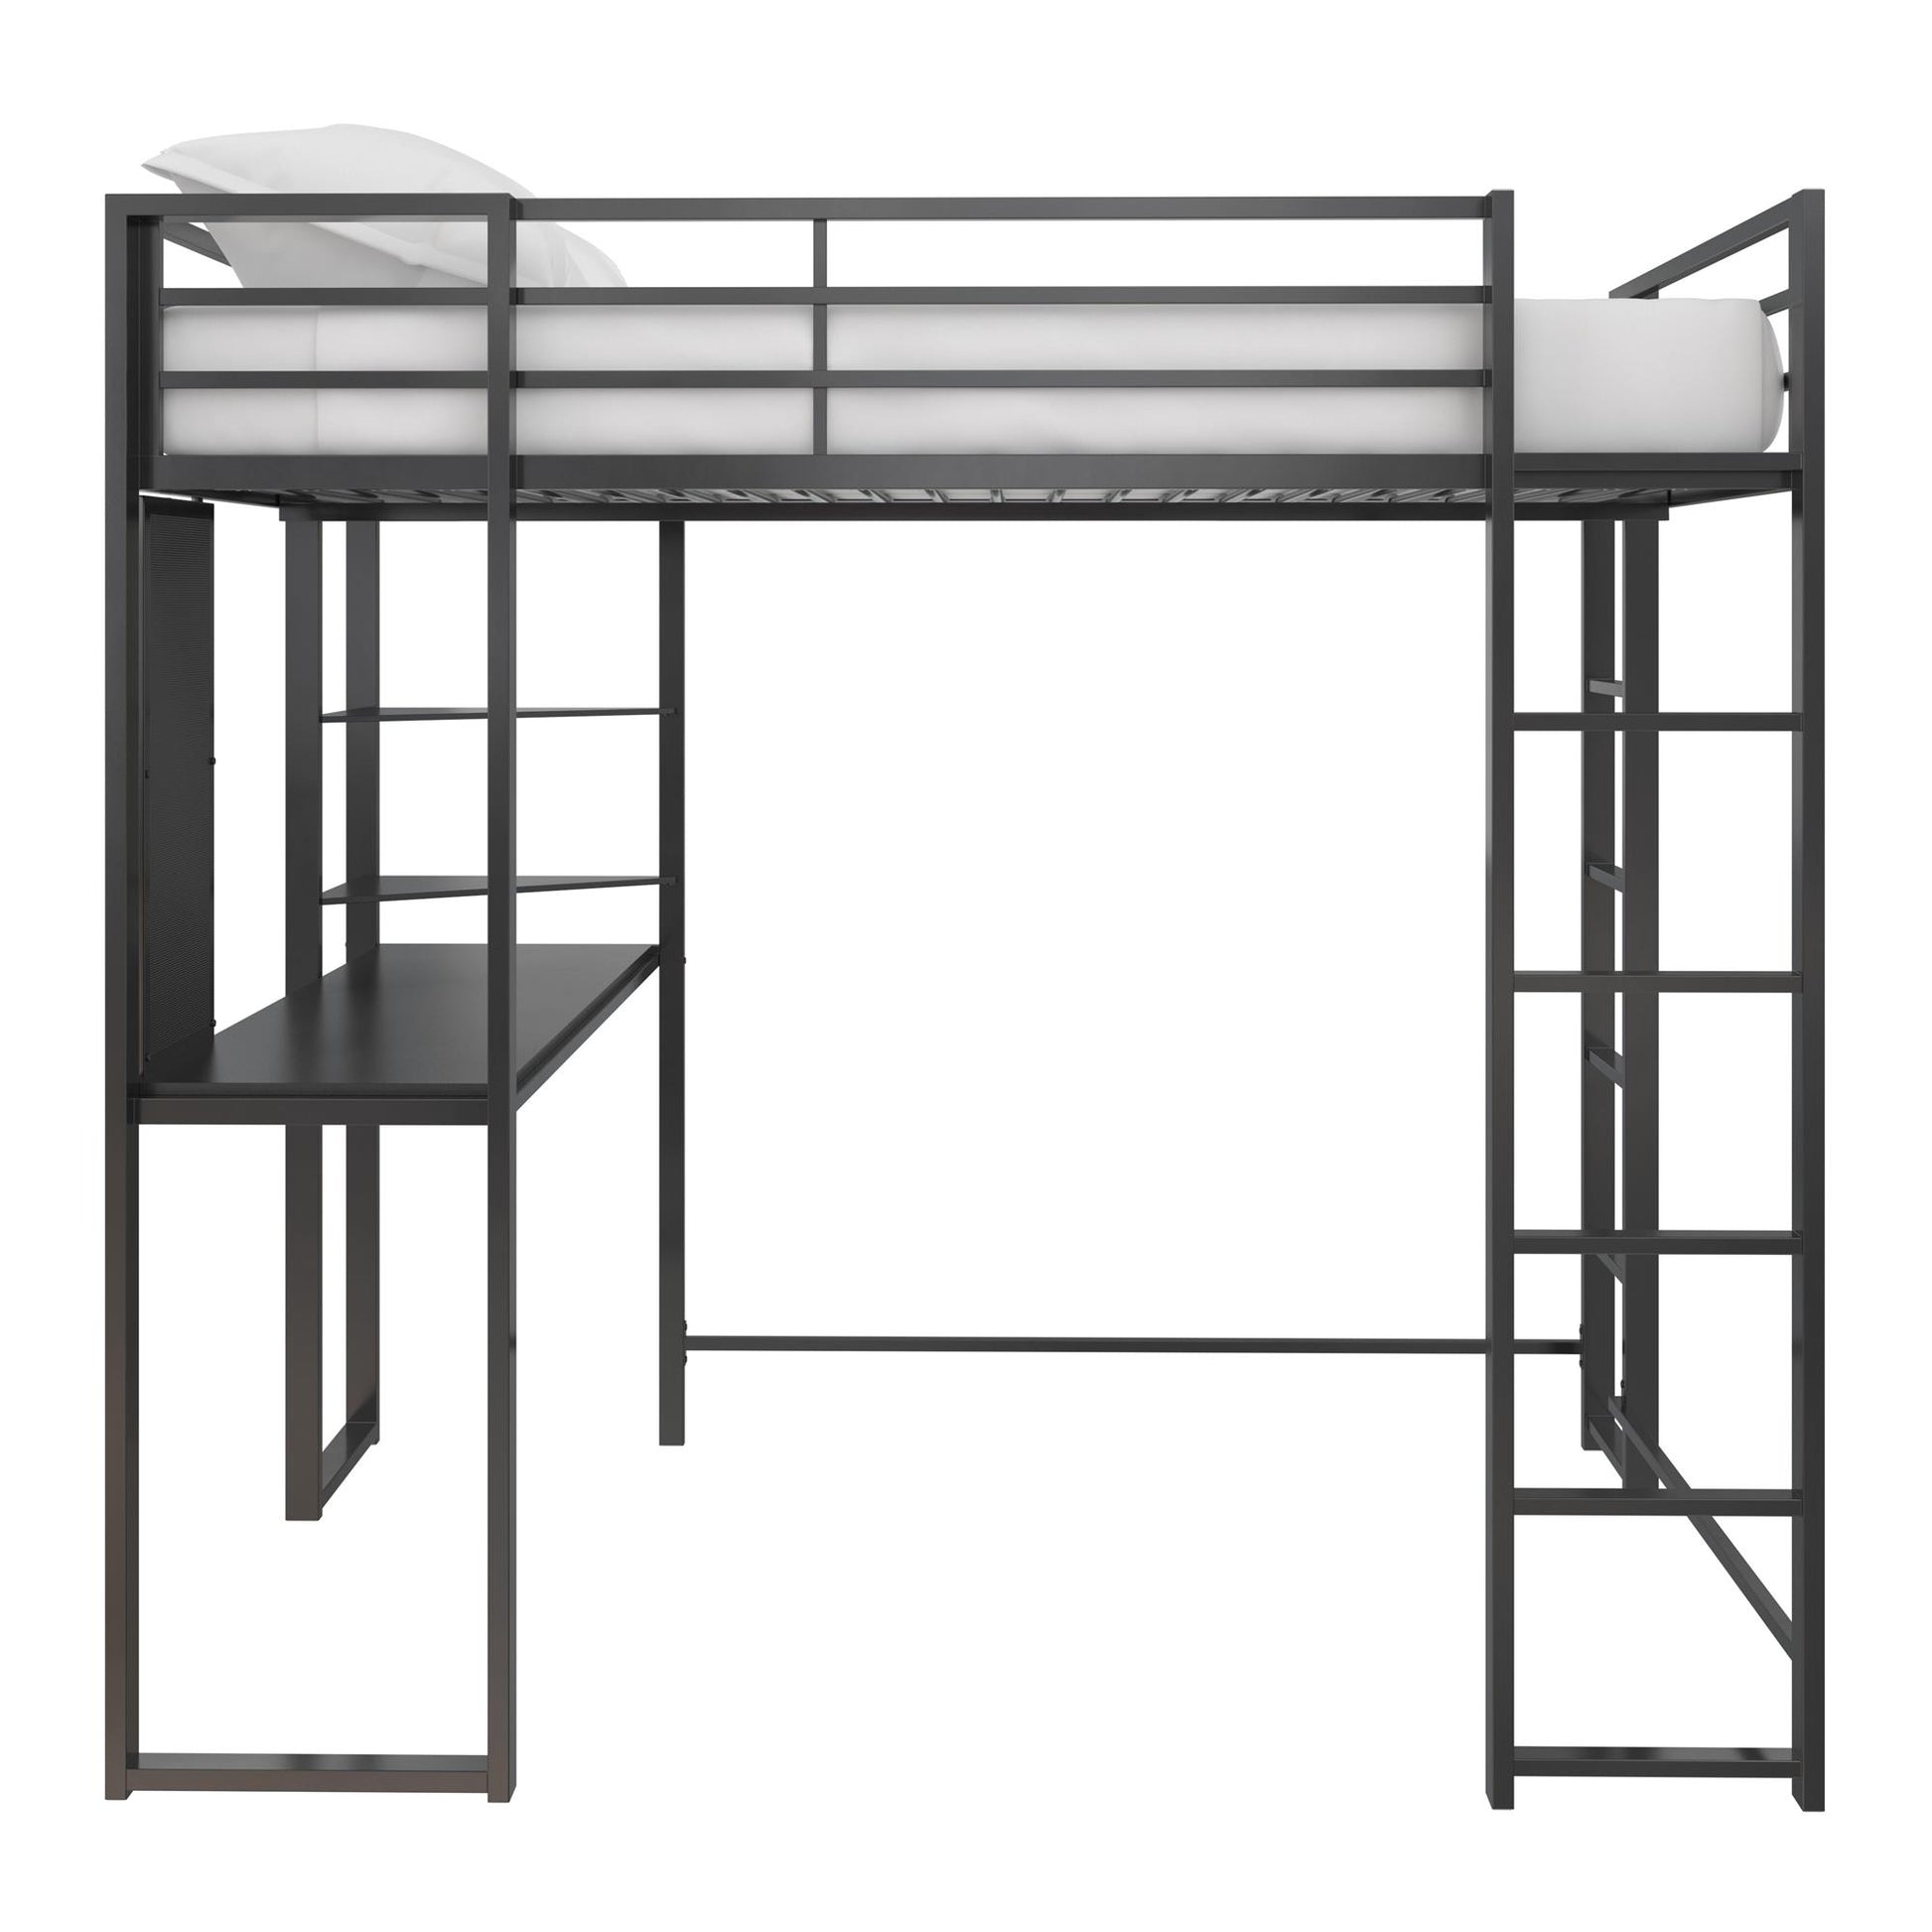 Abode Metal Loft Bed with Built in Desk and Storage Space - Black - Full